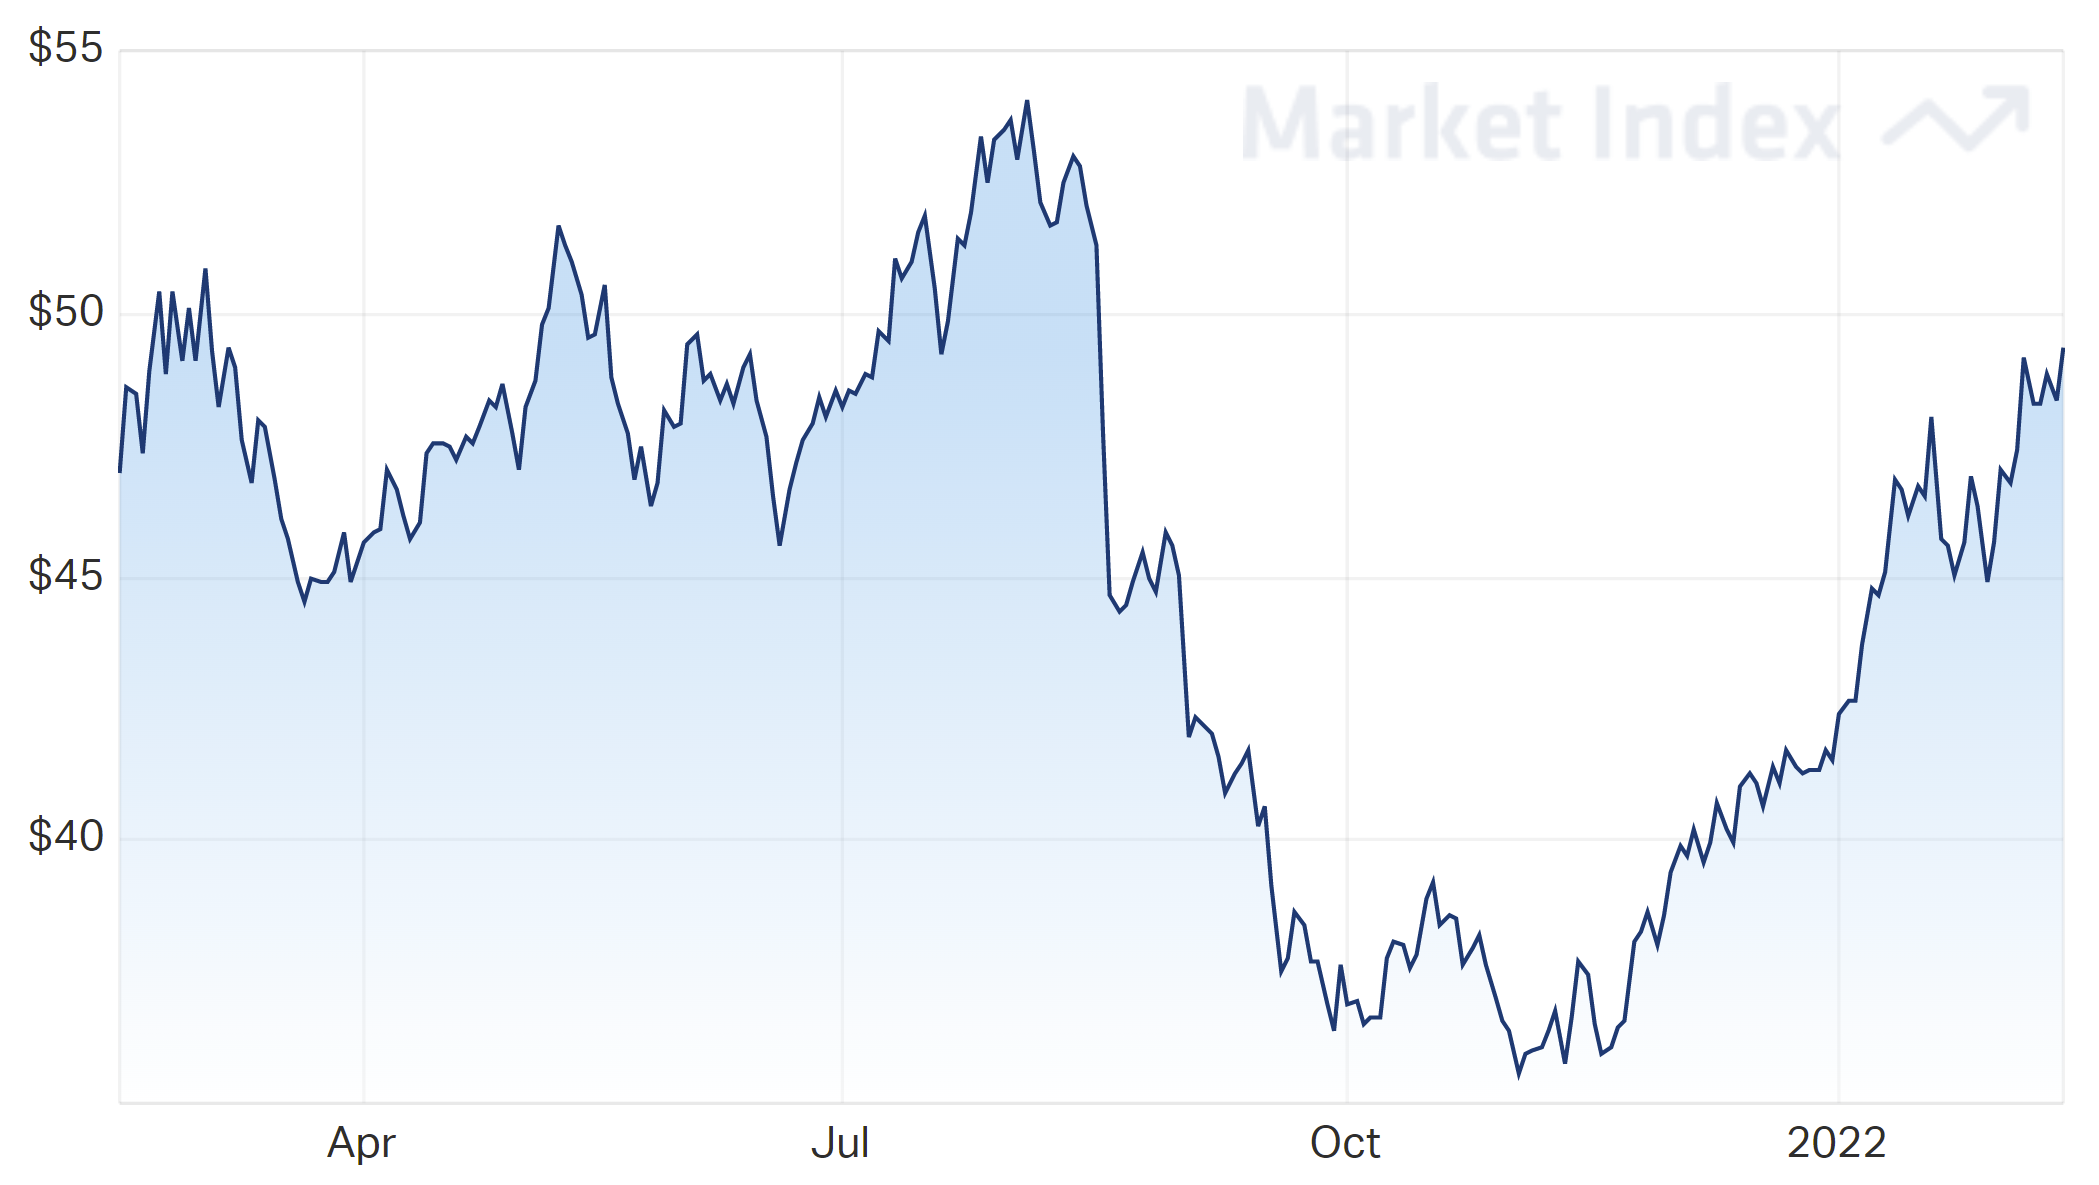 BHP share price chart over the last year